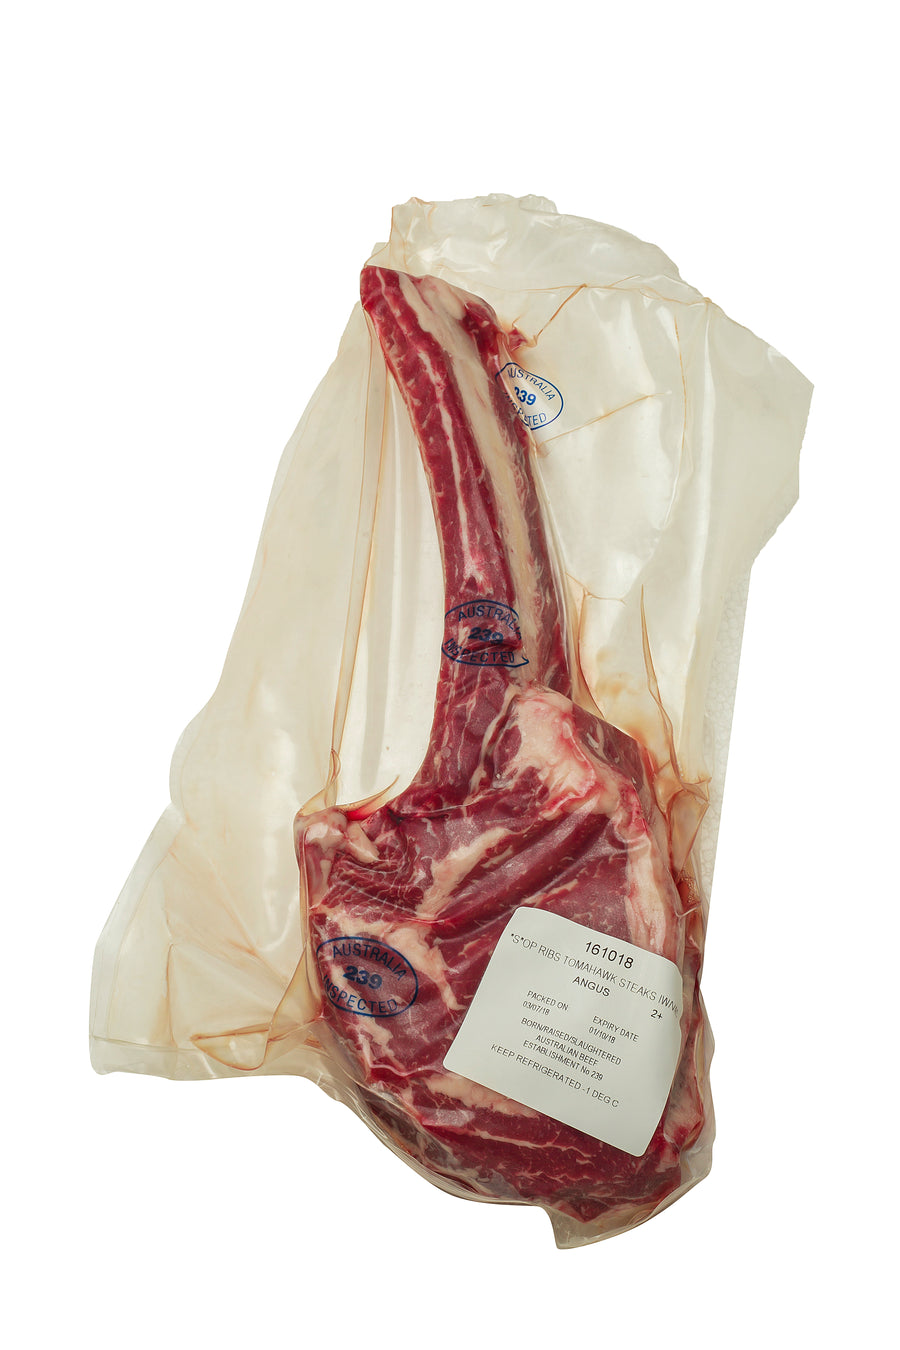 Jack's Creek Mb3+ 180 days Grain Fed Black Angus Tomahawk - Unfrenched